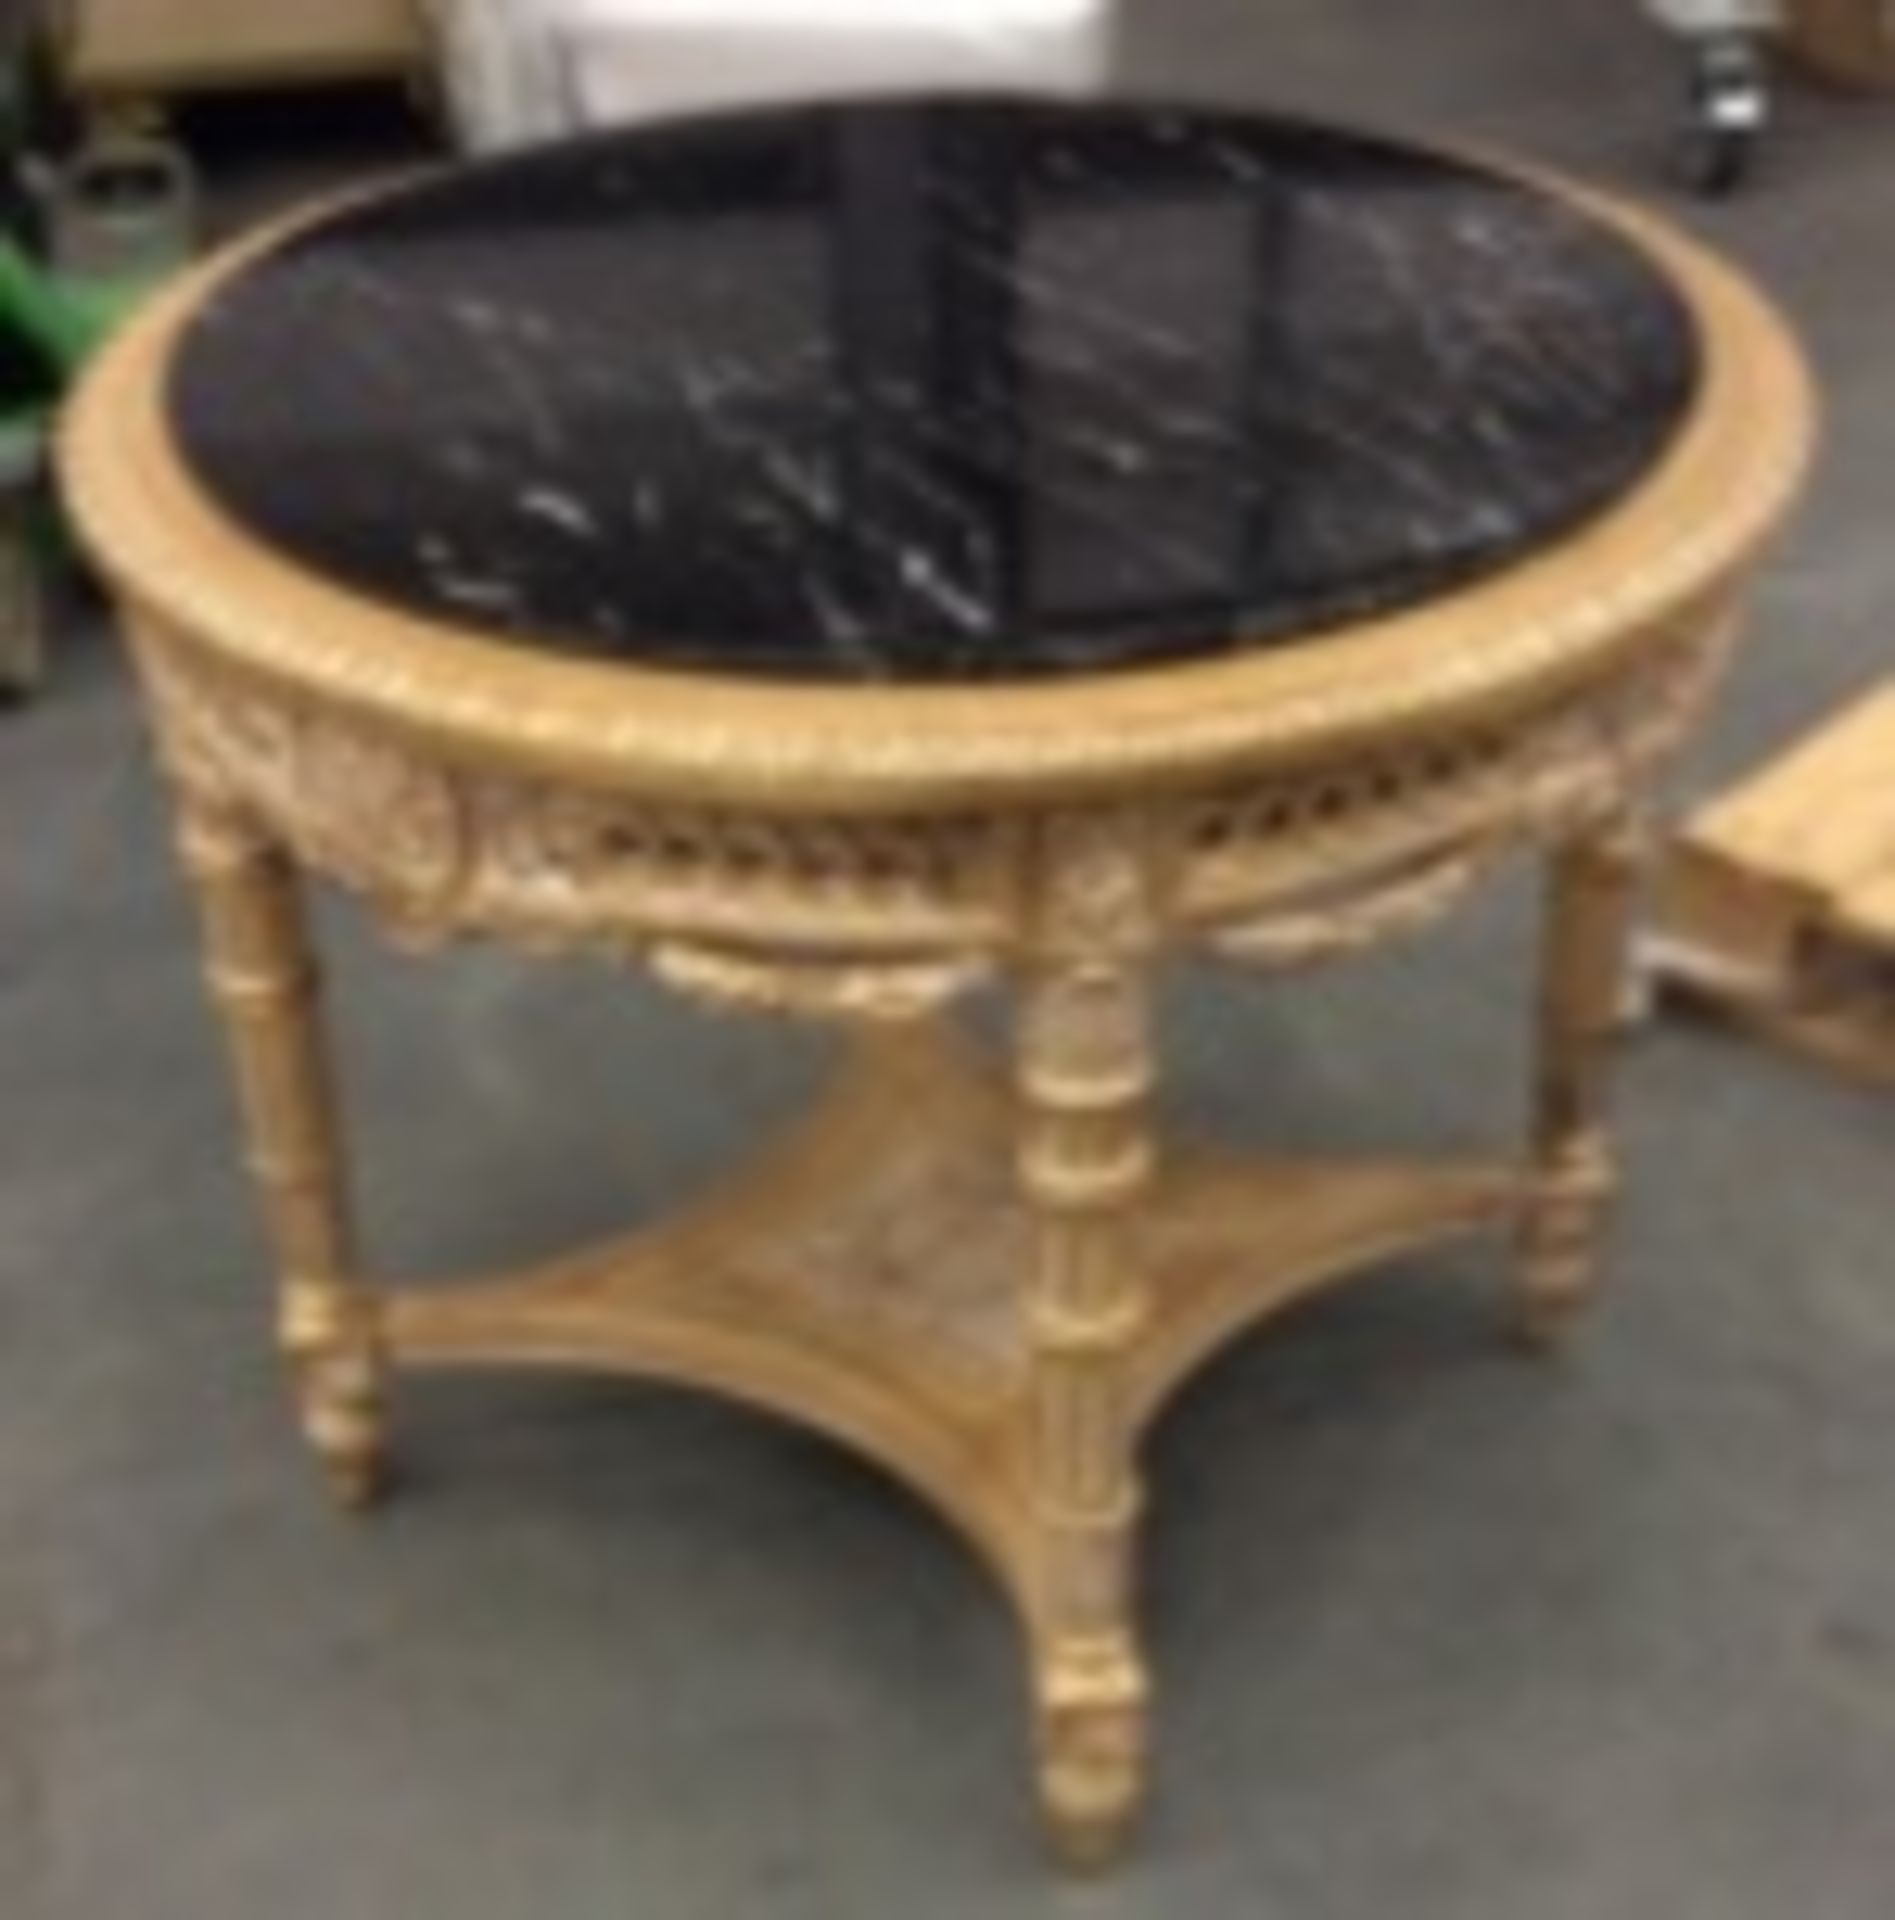 1 x ANGELO CAPPELLINI Marble Topped Wooden Coffee Table In Gold - Dimensions: H76cm x Diameter - Image 3 of 8